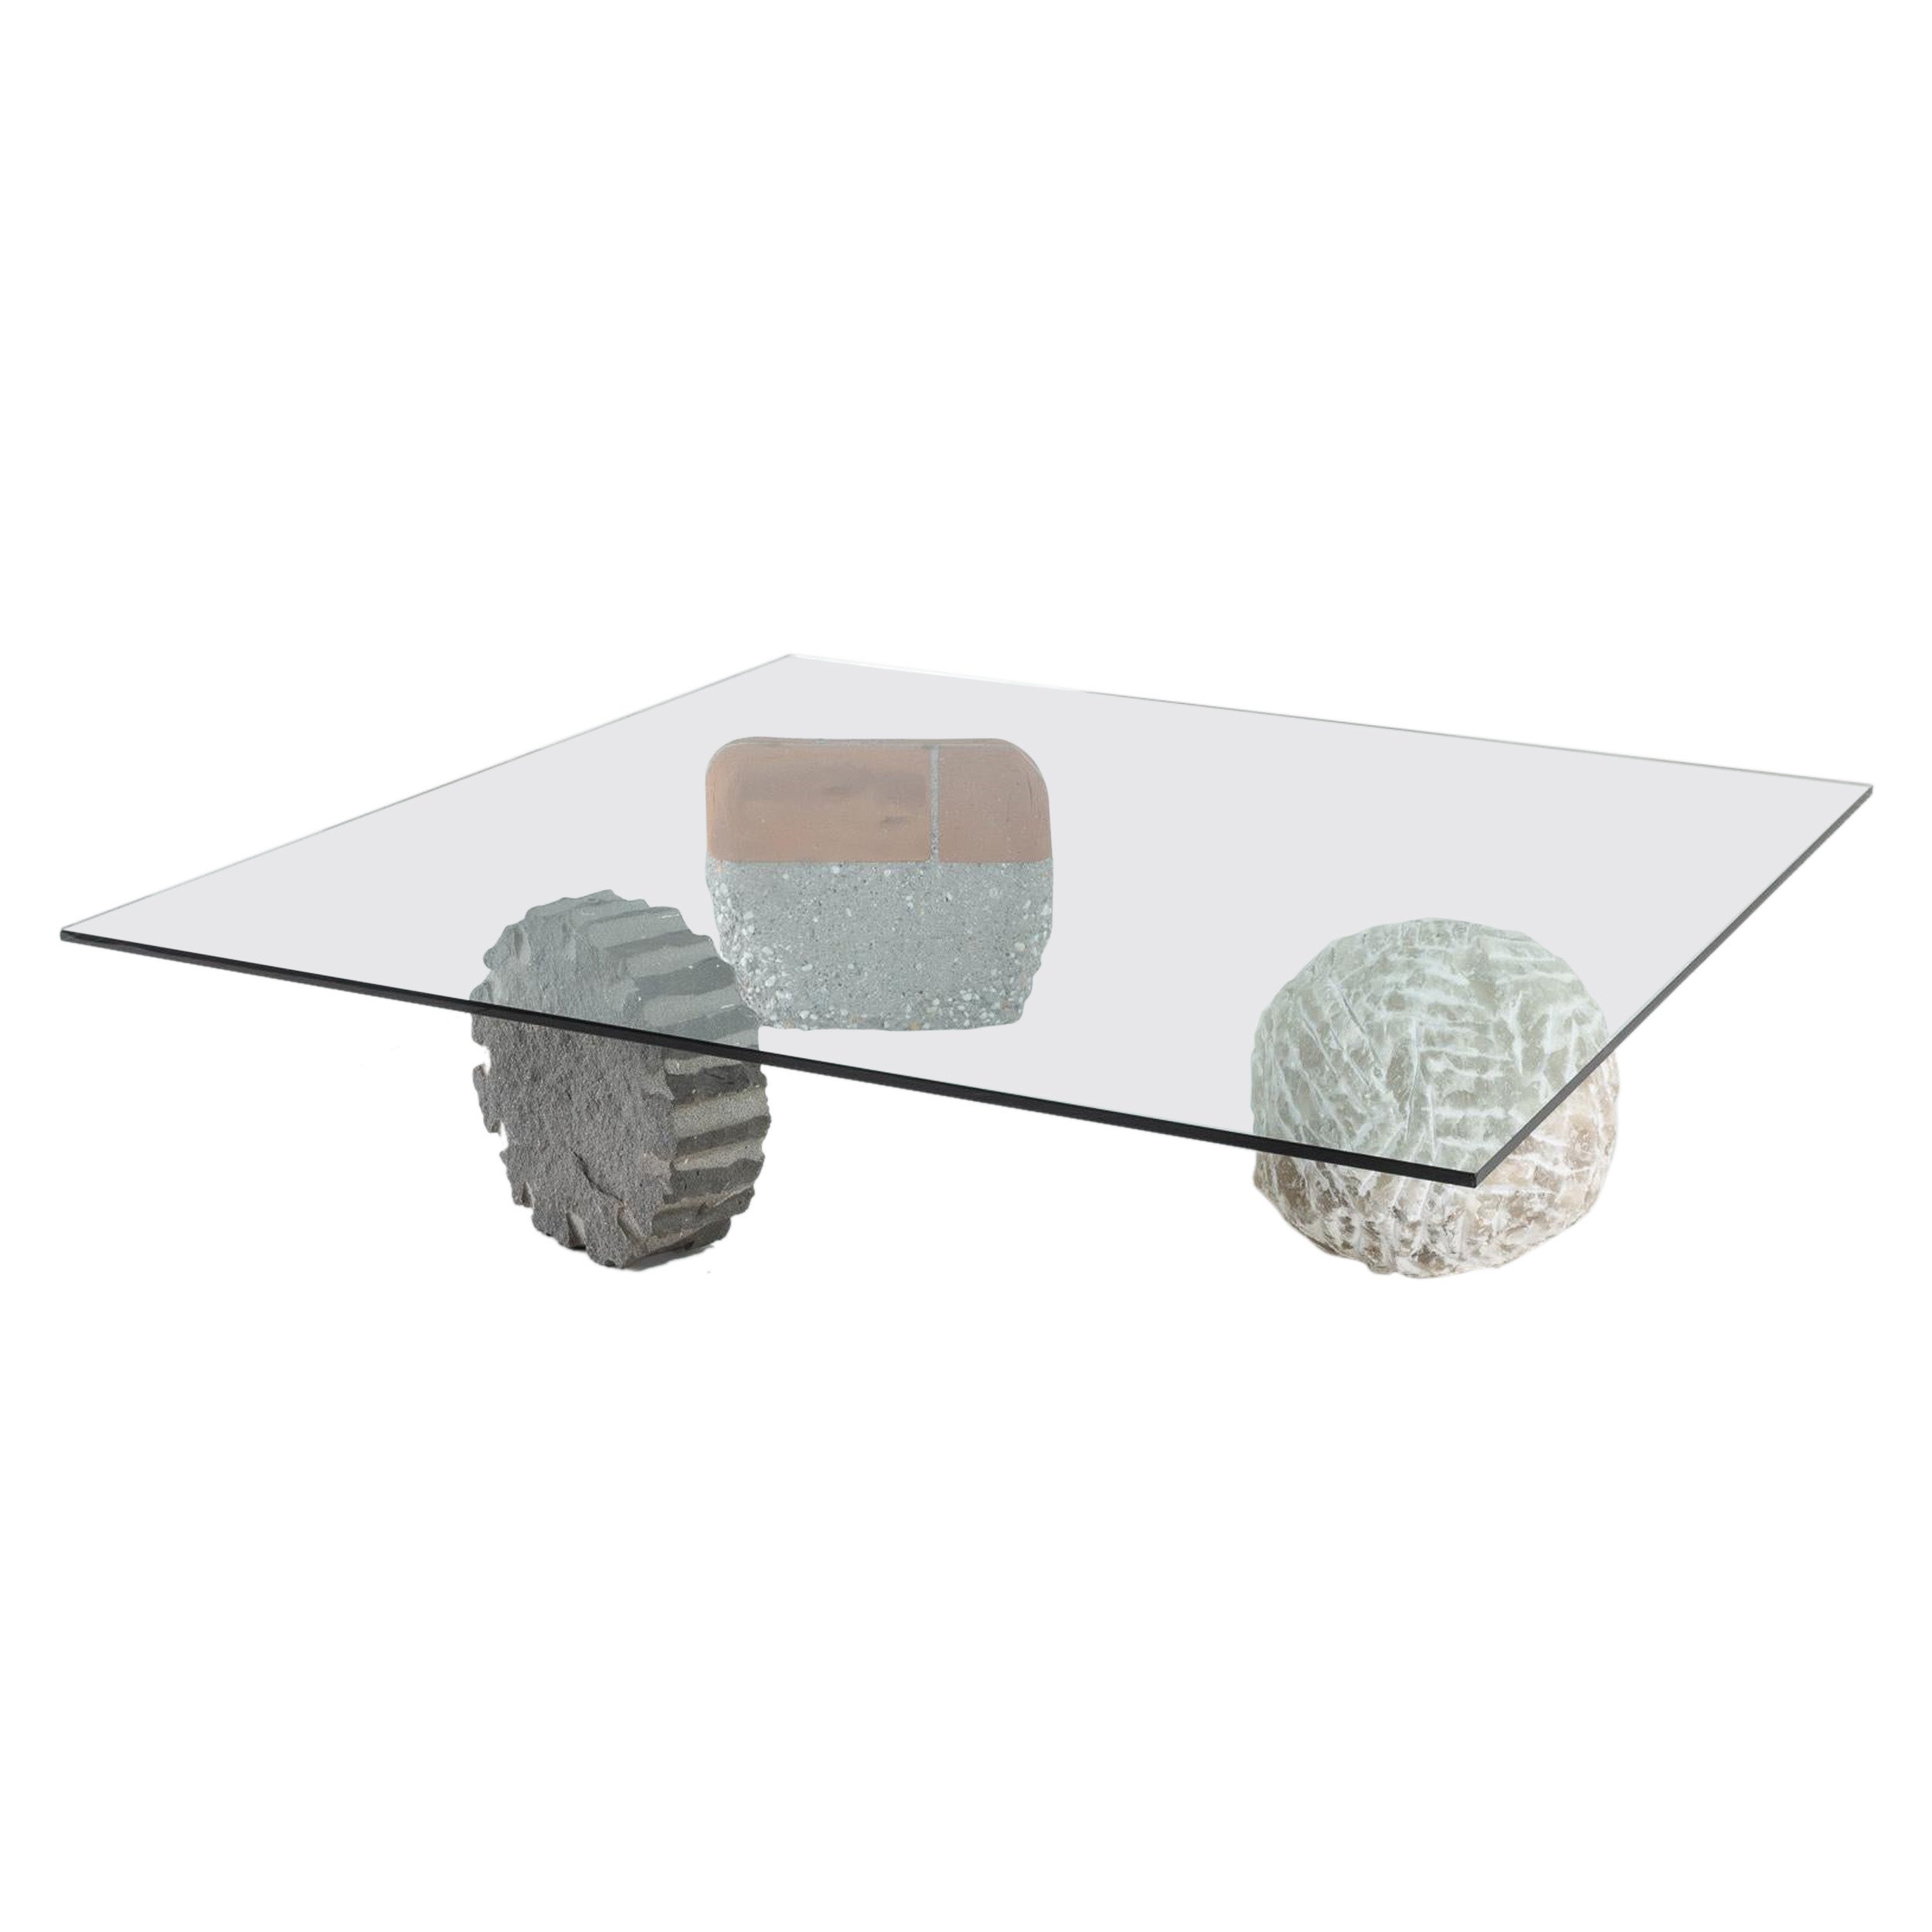 Center low table with sculptural stone feet and glass top - Casigliani Italy 80s For Sale